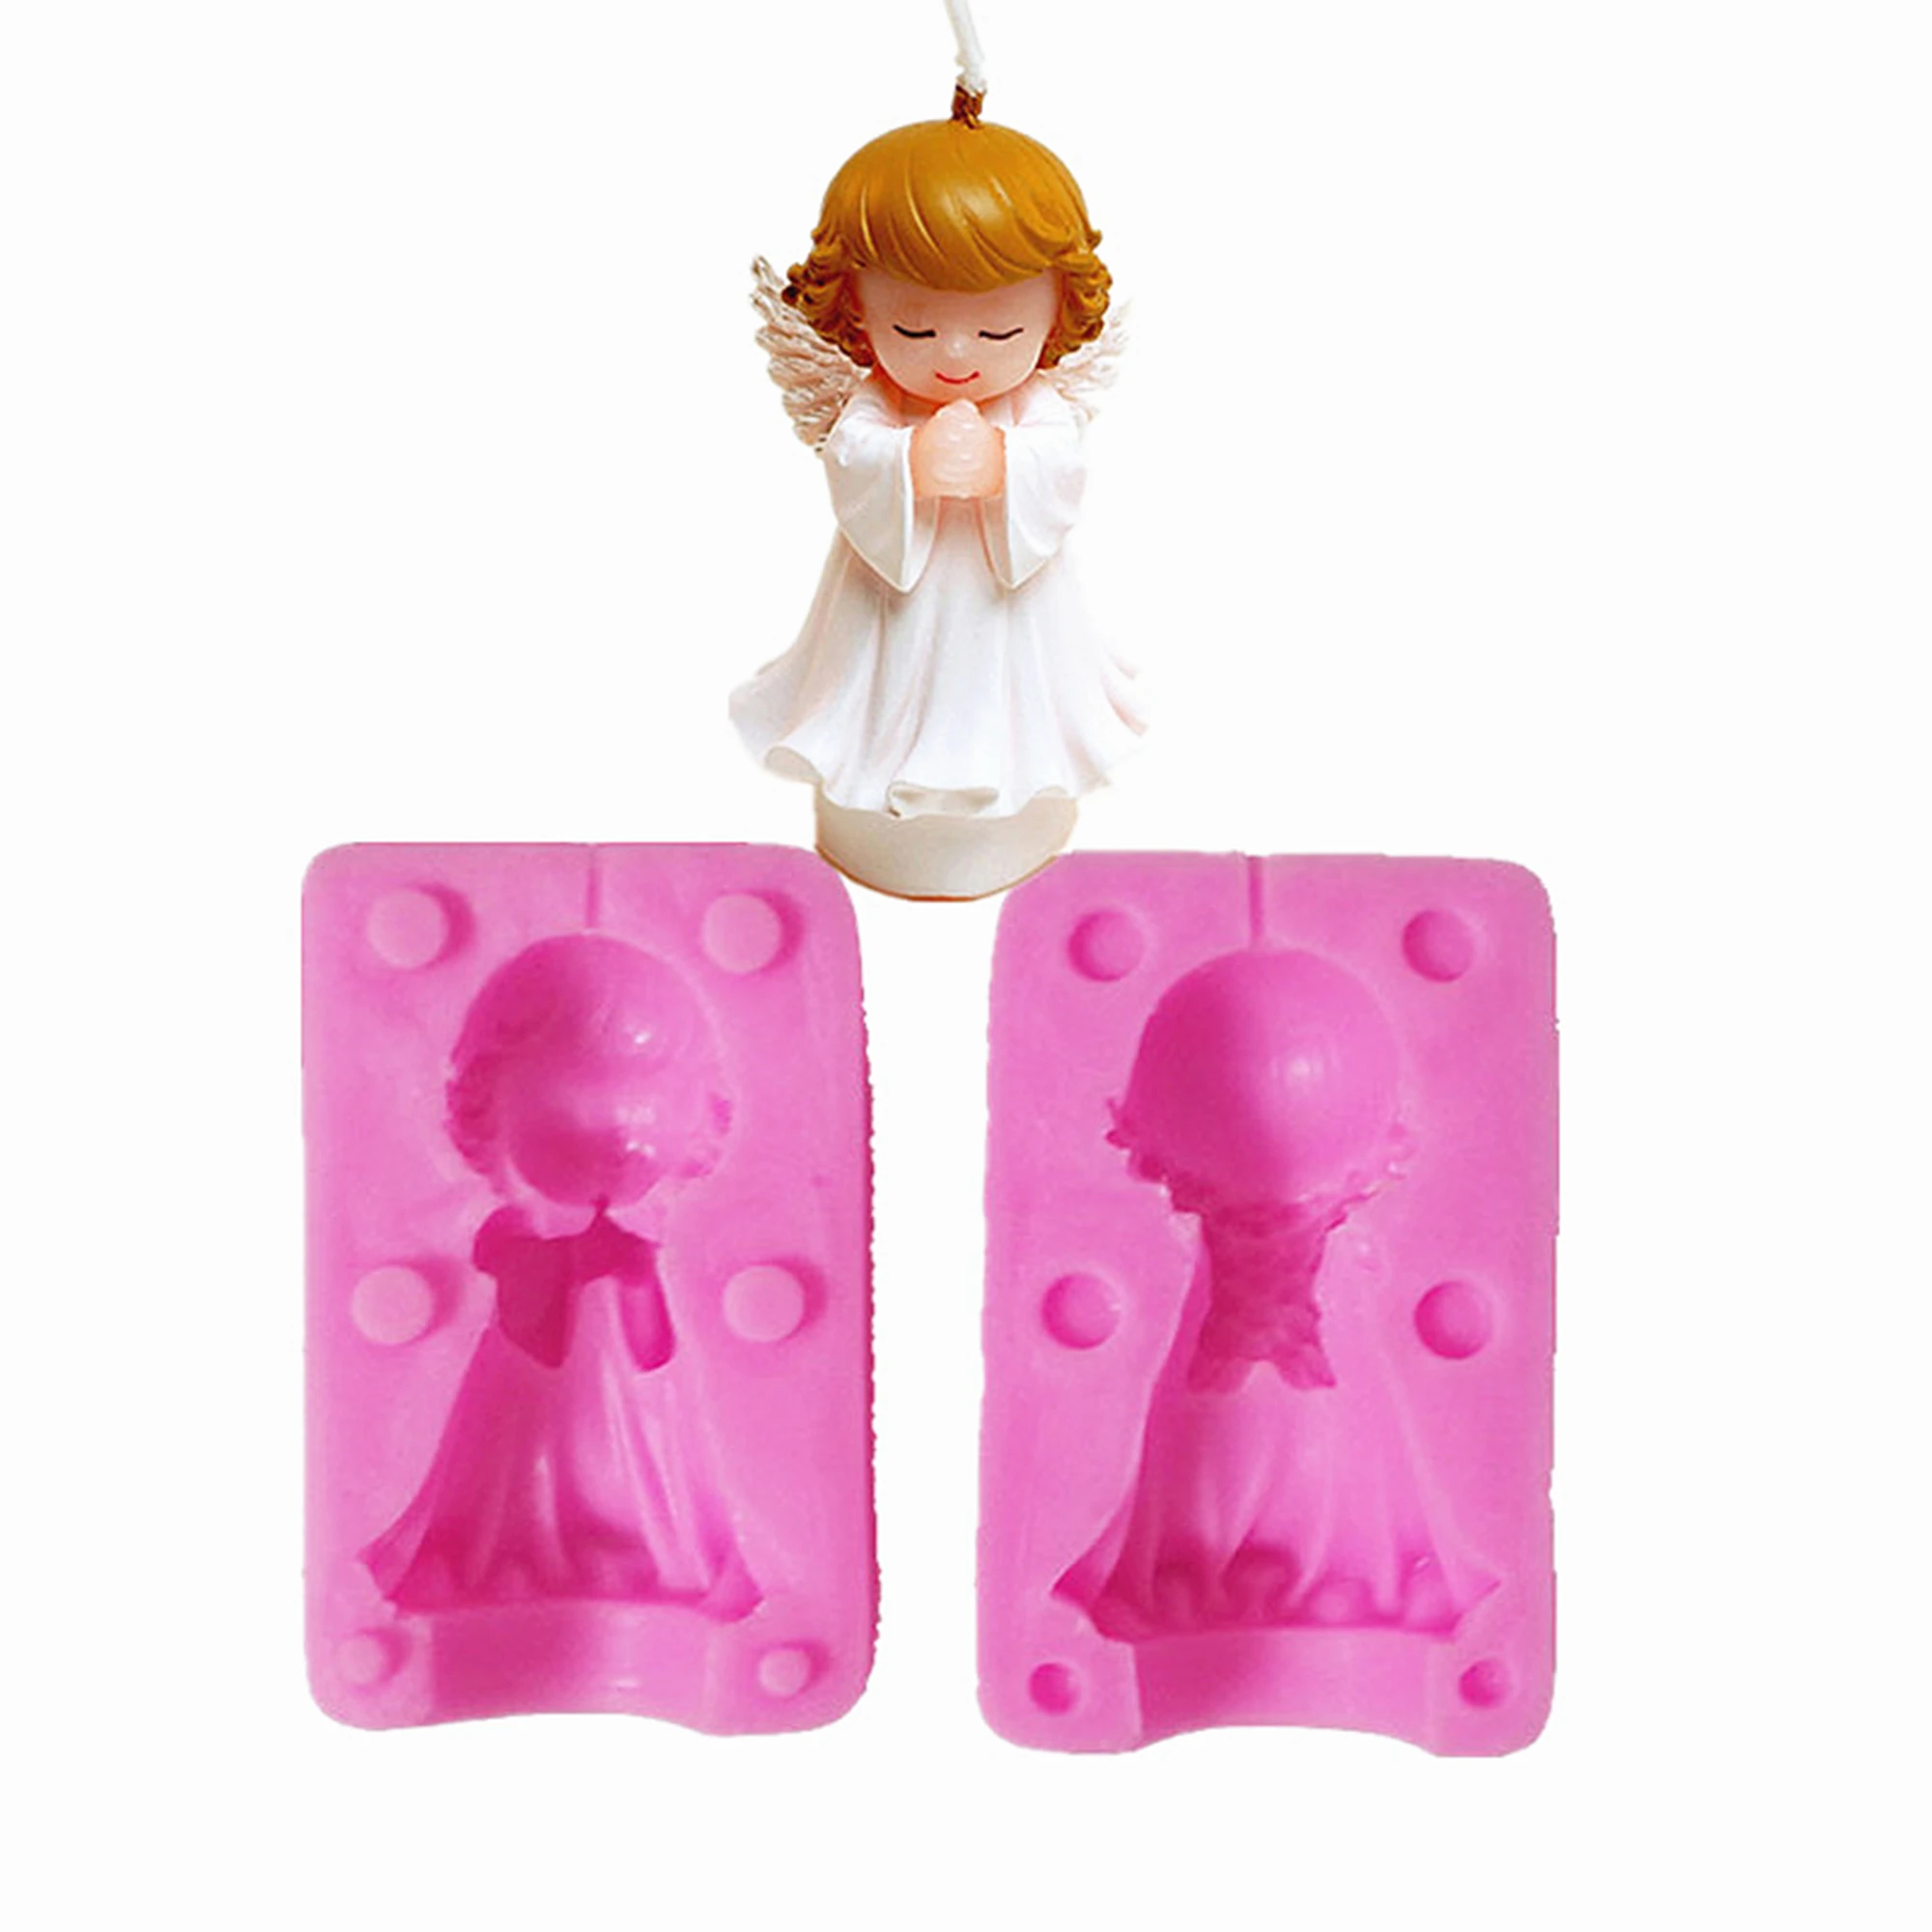 

3D Girl Shape Fondant Silicone Mould Kitchen Baking Chocolate Pastry Candy Clay Making Cupcake Decoration Tools